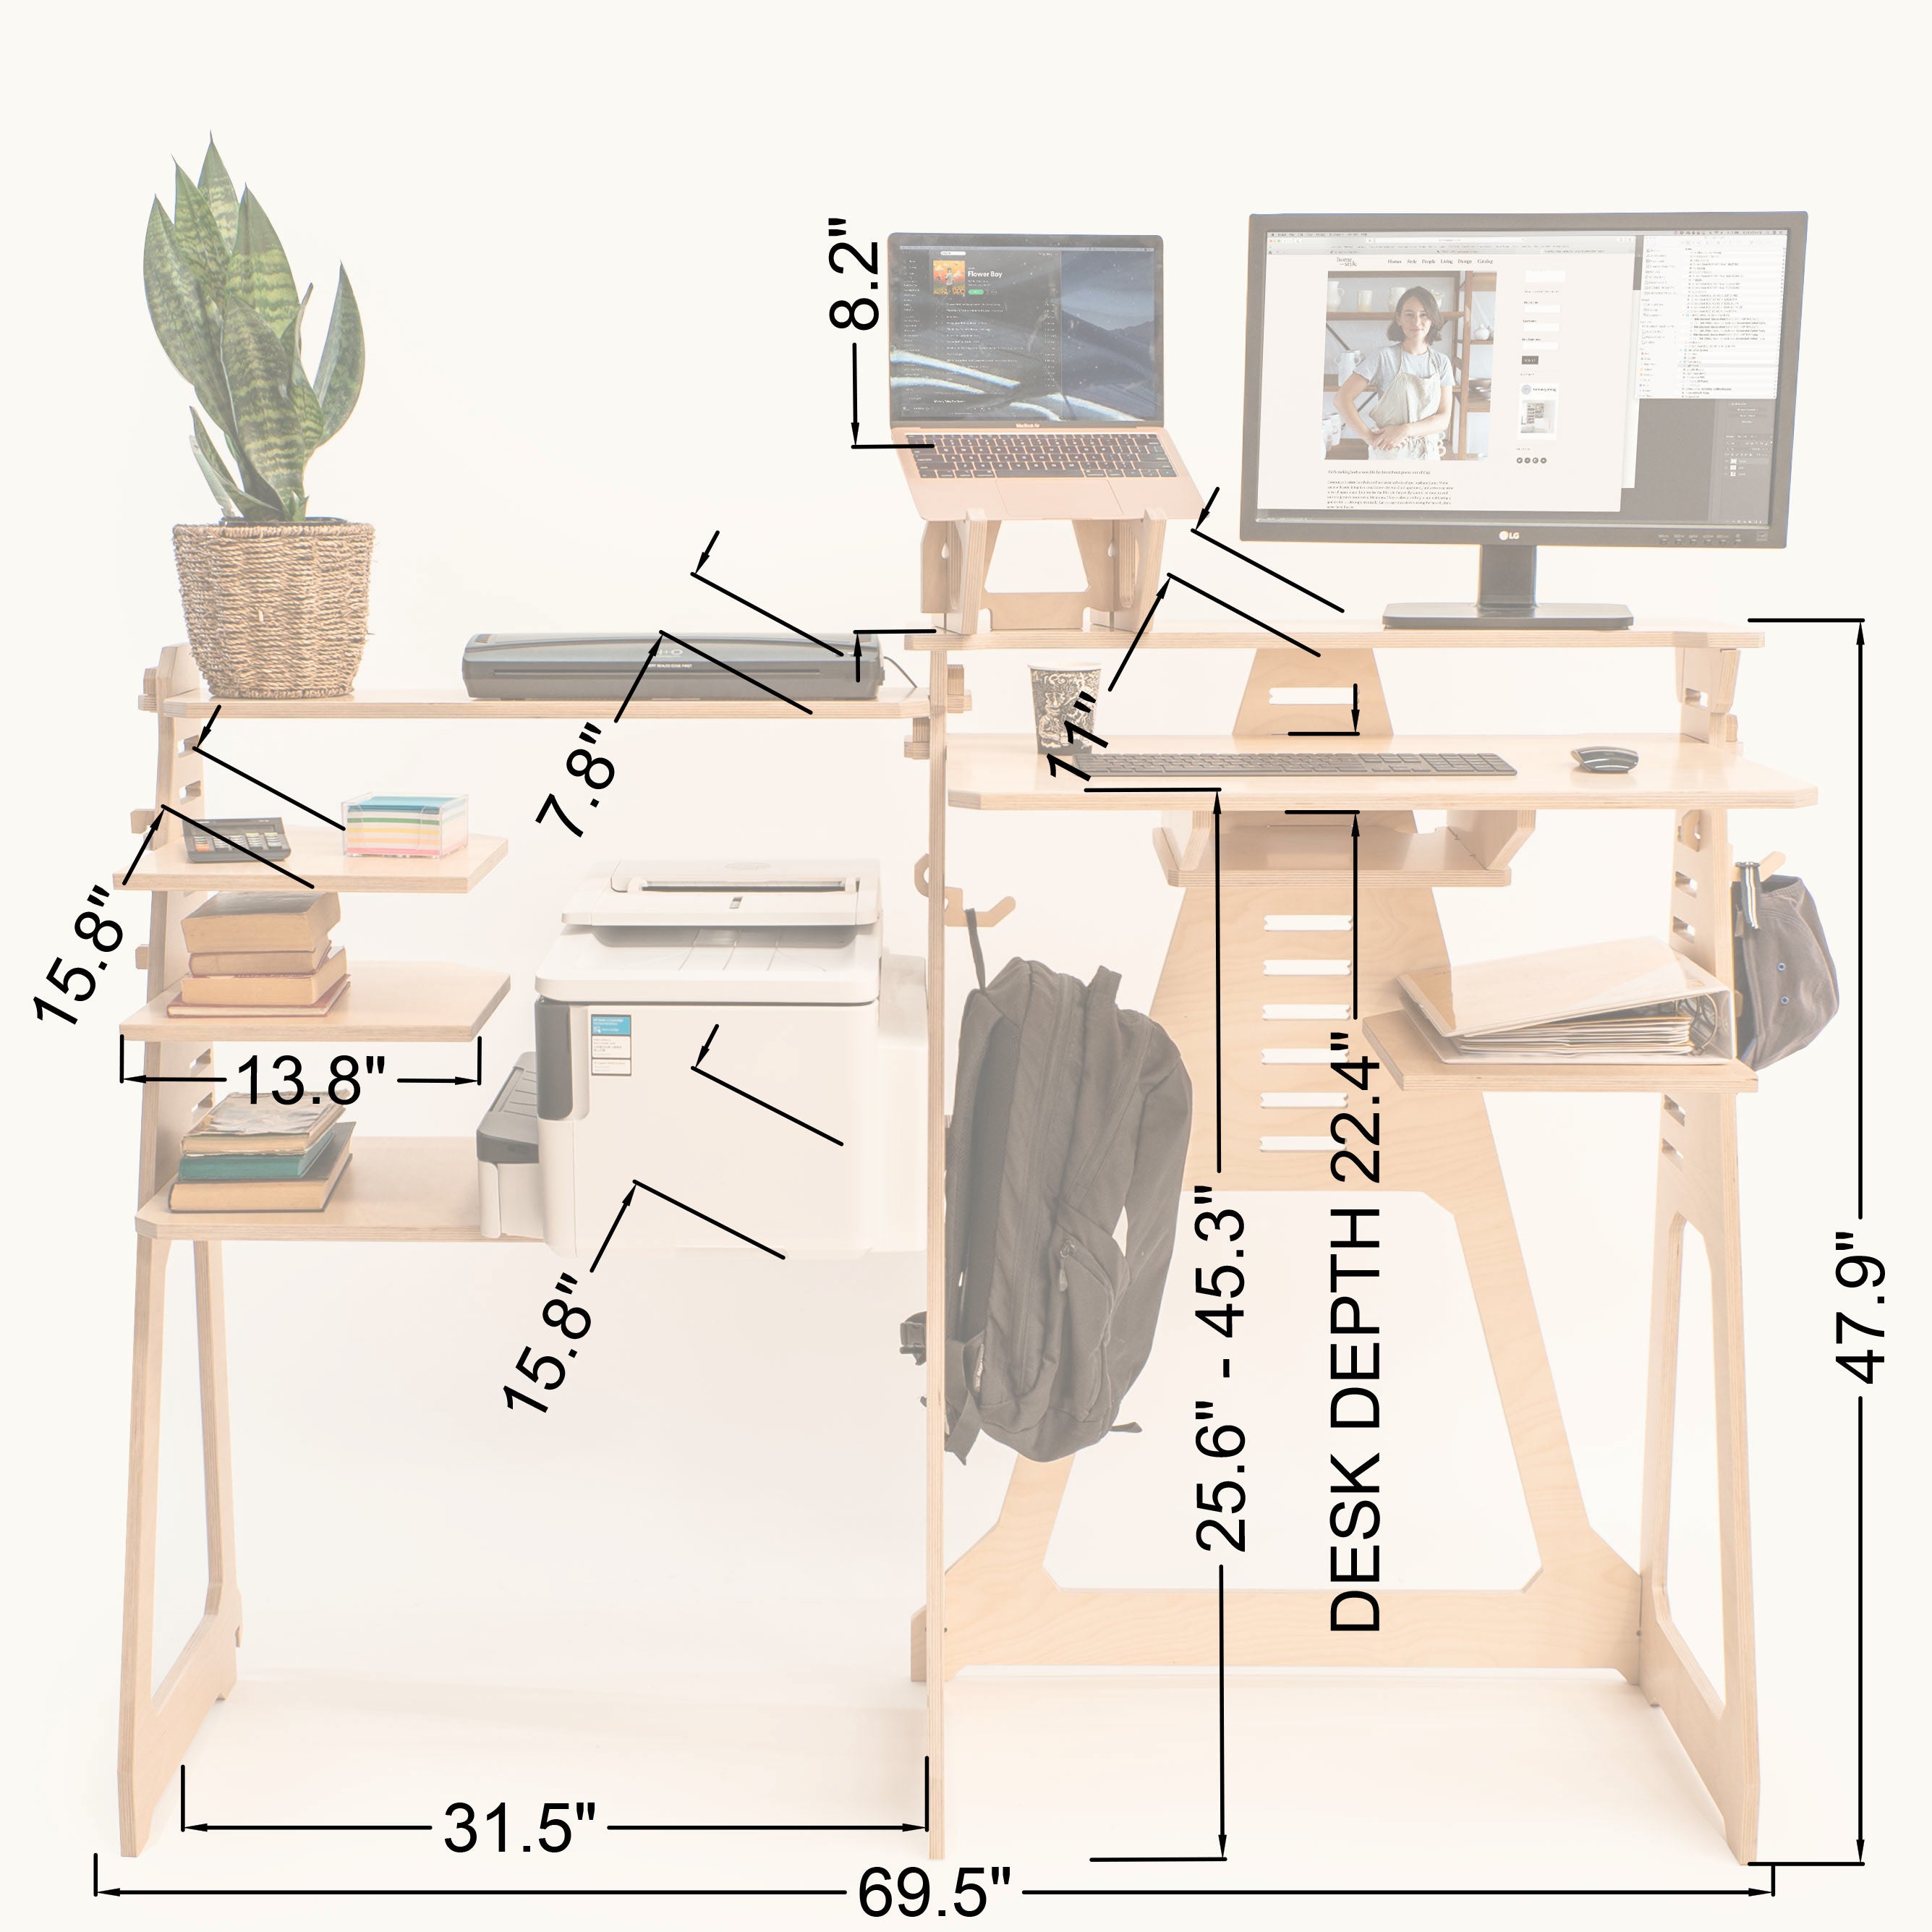 Standing Desk with Side Shelves